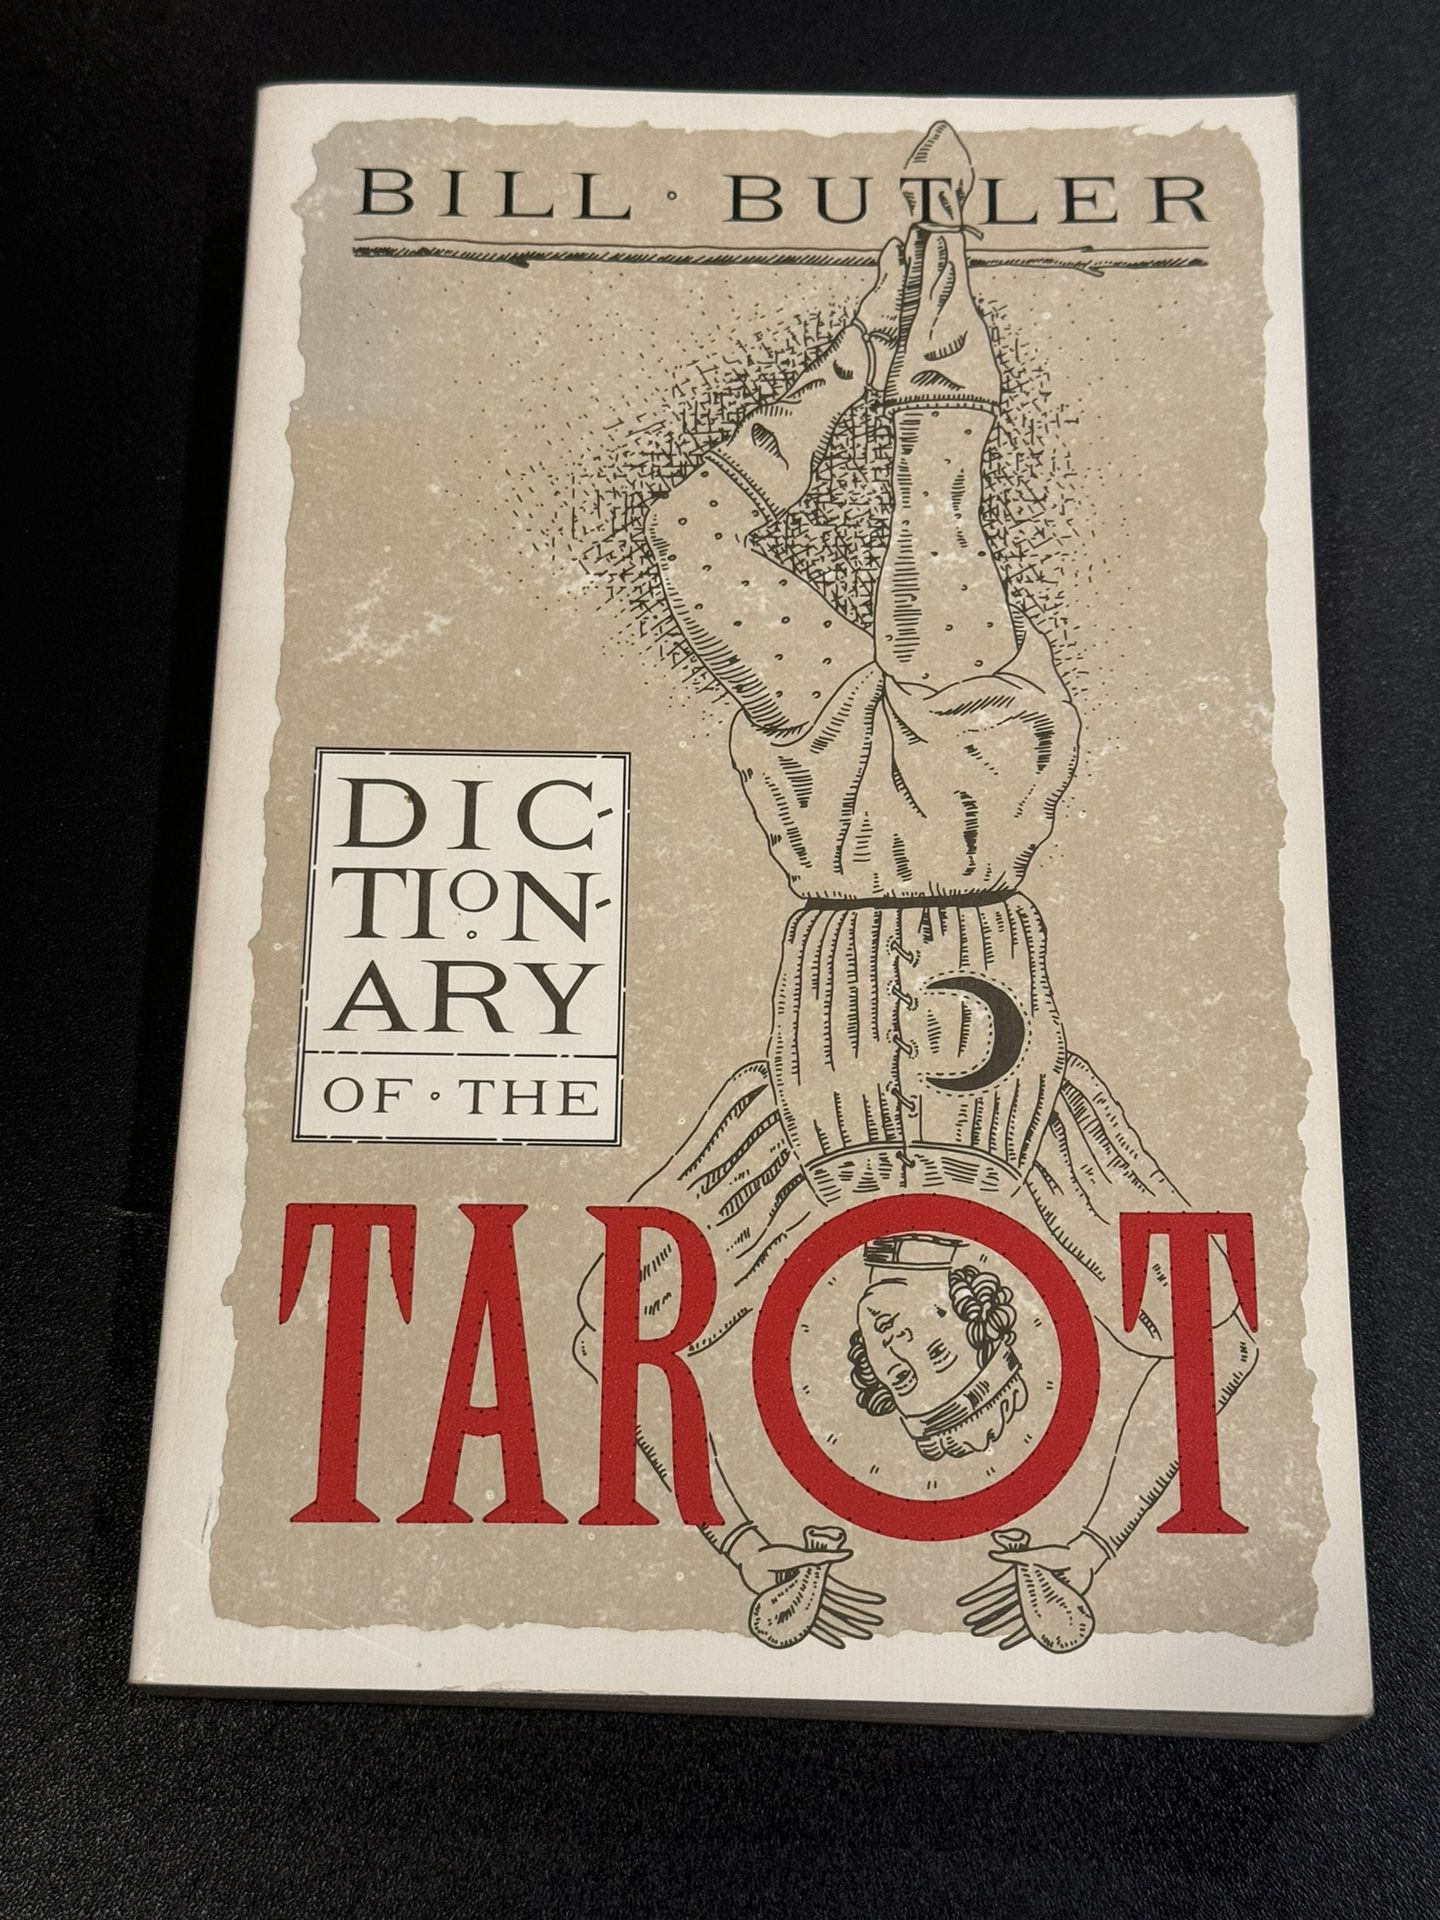 Vintage Paperback Book Dictionary of the Tarot Bill Butler 1977. 253 pages. Very nice condition, no writing or inscriptions in book.